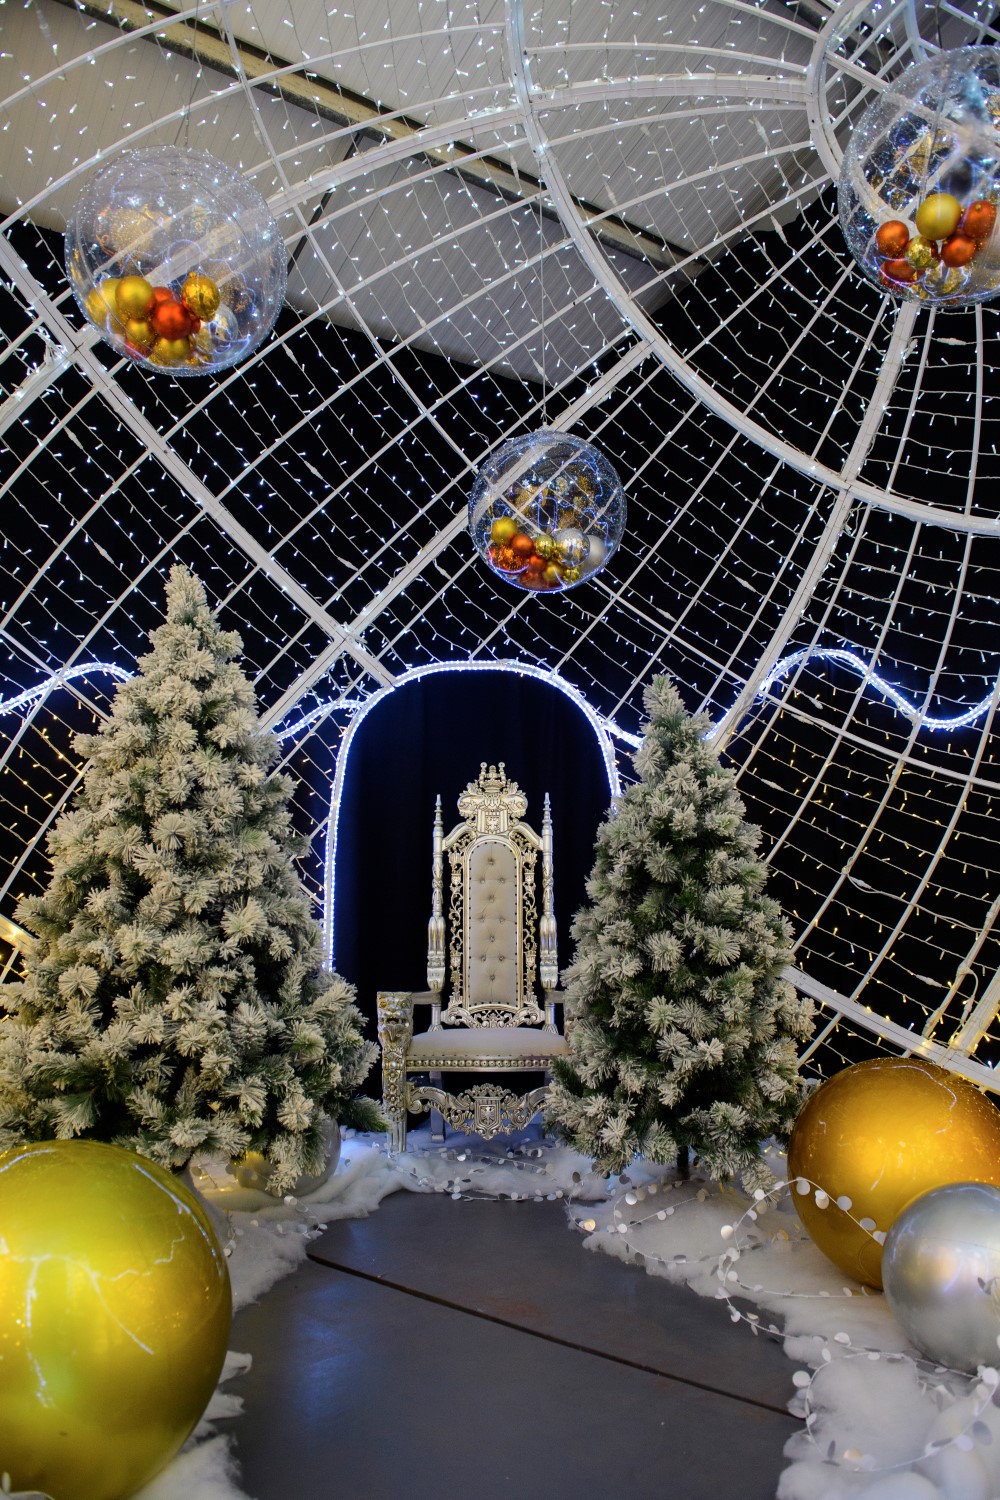 White light up bauble motif with white throne, plain flocked Christmas trees and giant baubles inside it.